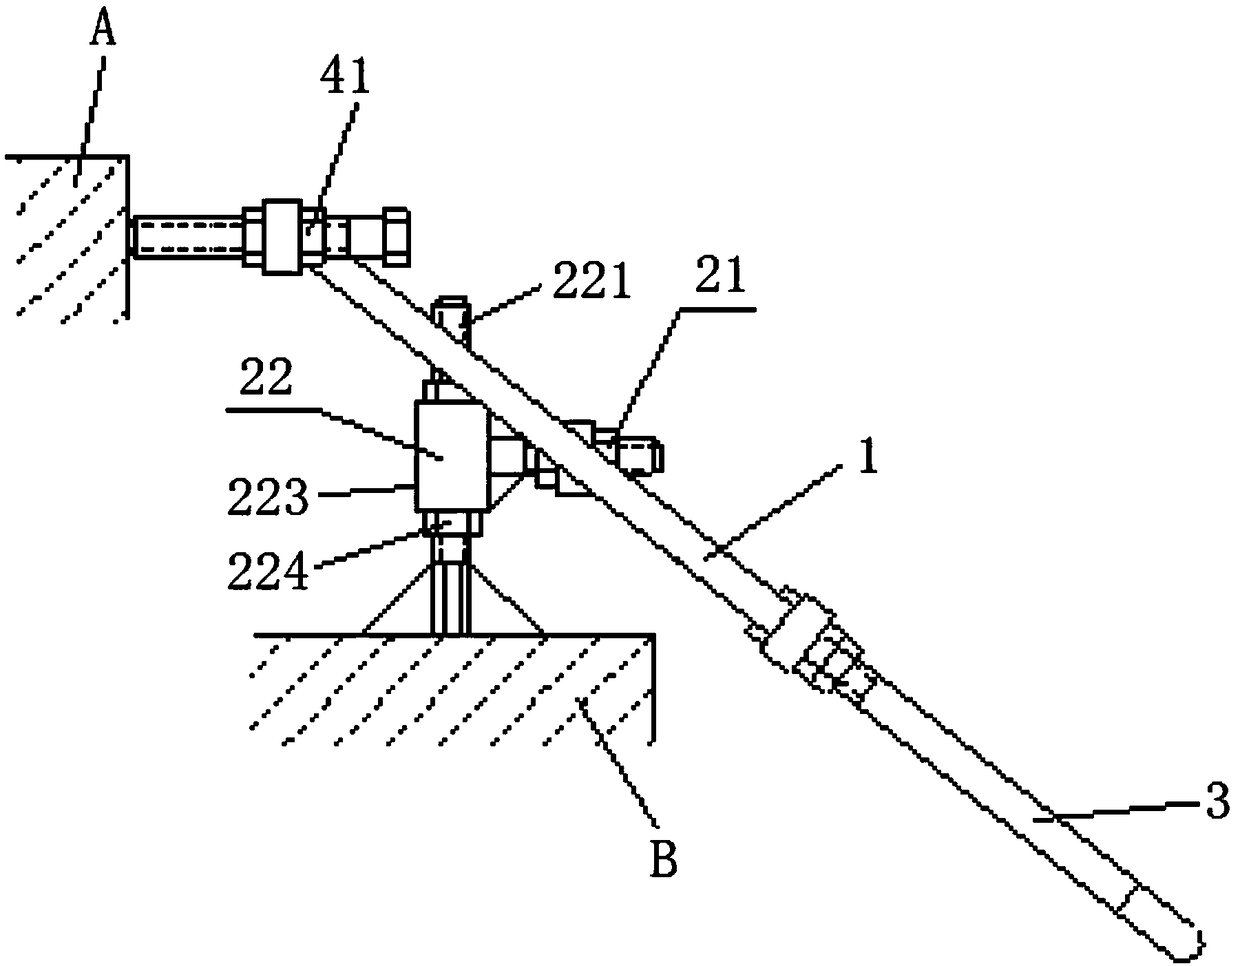 Position adjustment device and circular die-cutting equipment